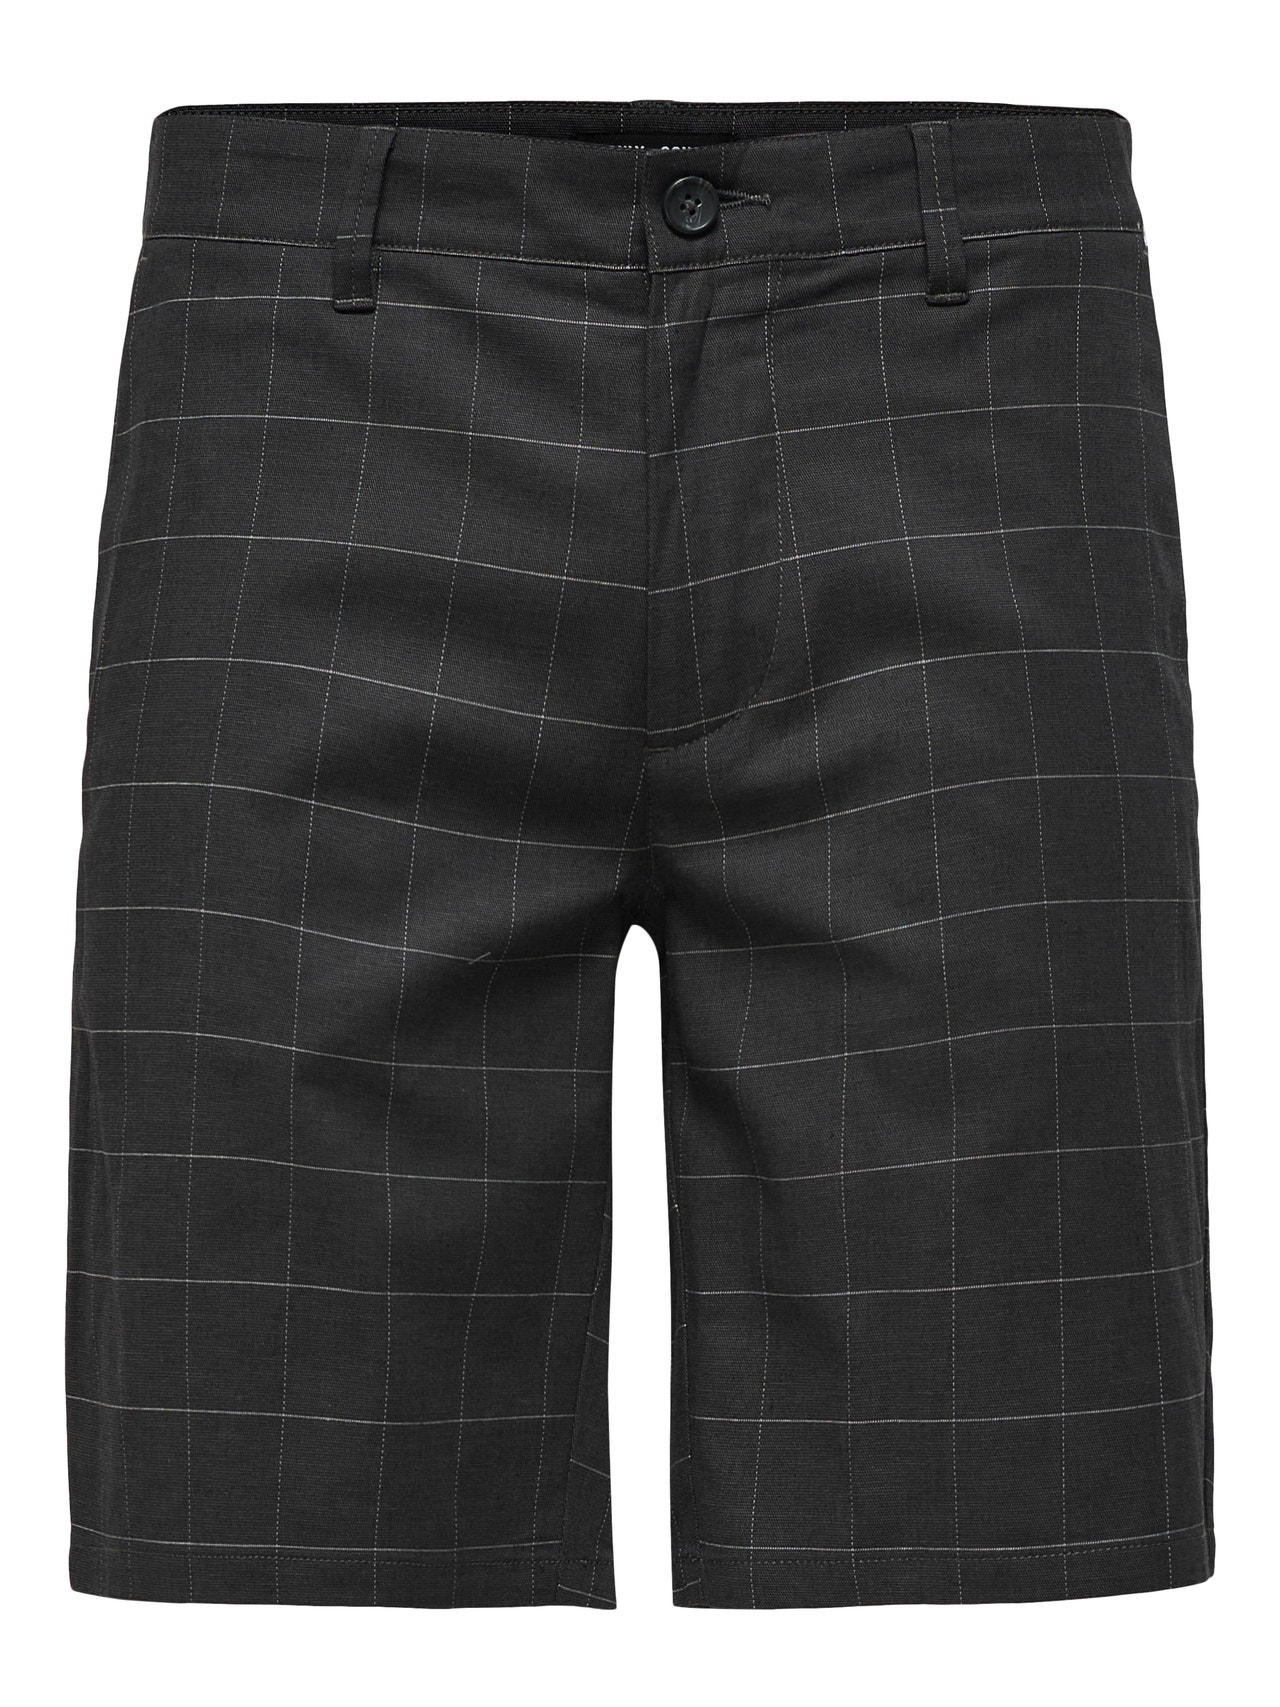 ONLY & SONS Normal passform Shorts -Black - 22020475